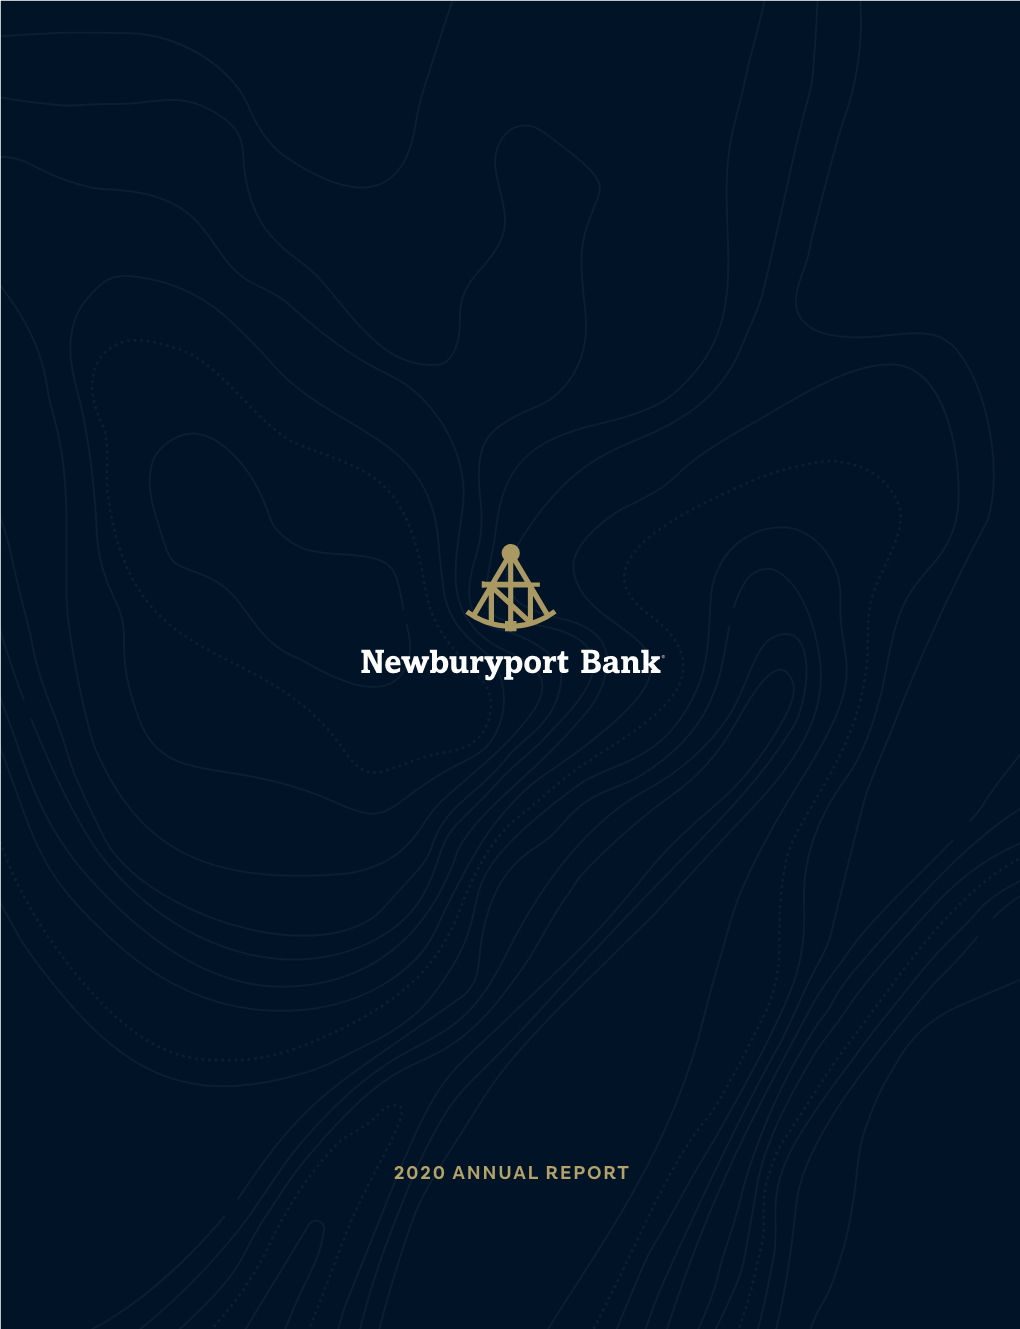 2020 Annual Report Journey Well 2020 Annual Report Newburyport Bank 2020 Annual Report